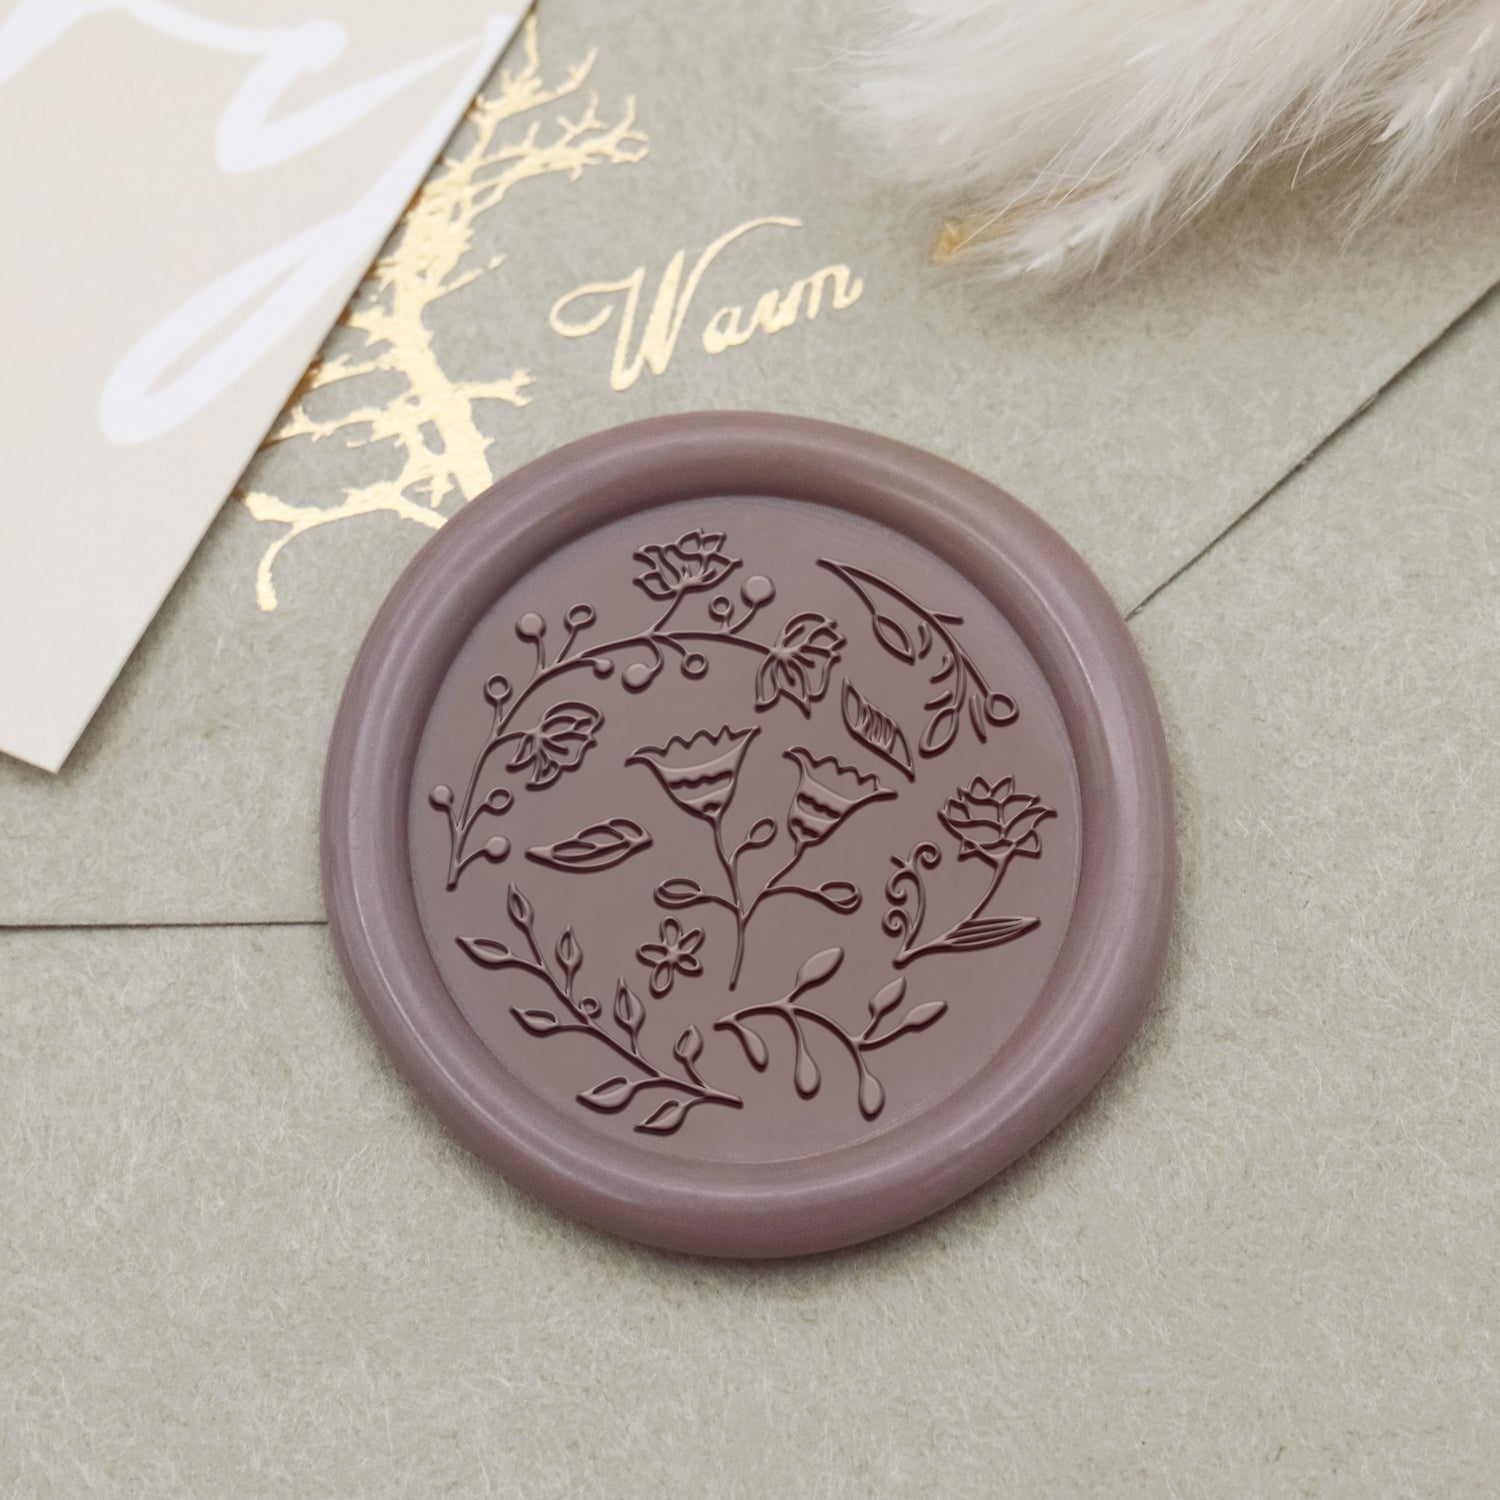 Floral Tile Pattern Wax Seal Stamp - Style 7 1